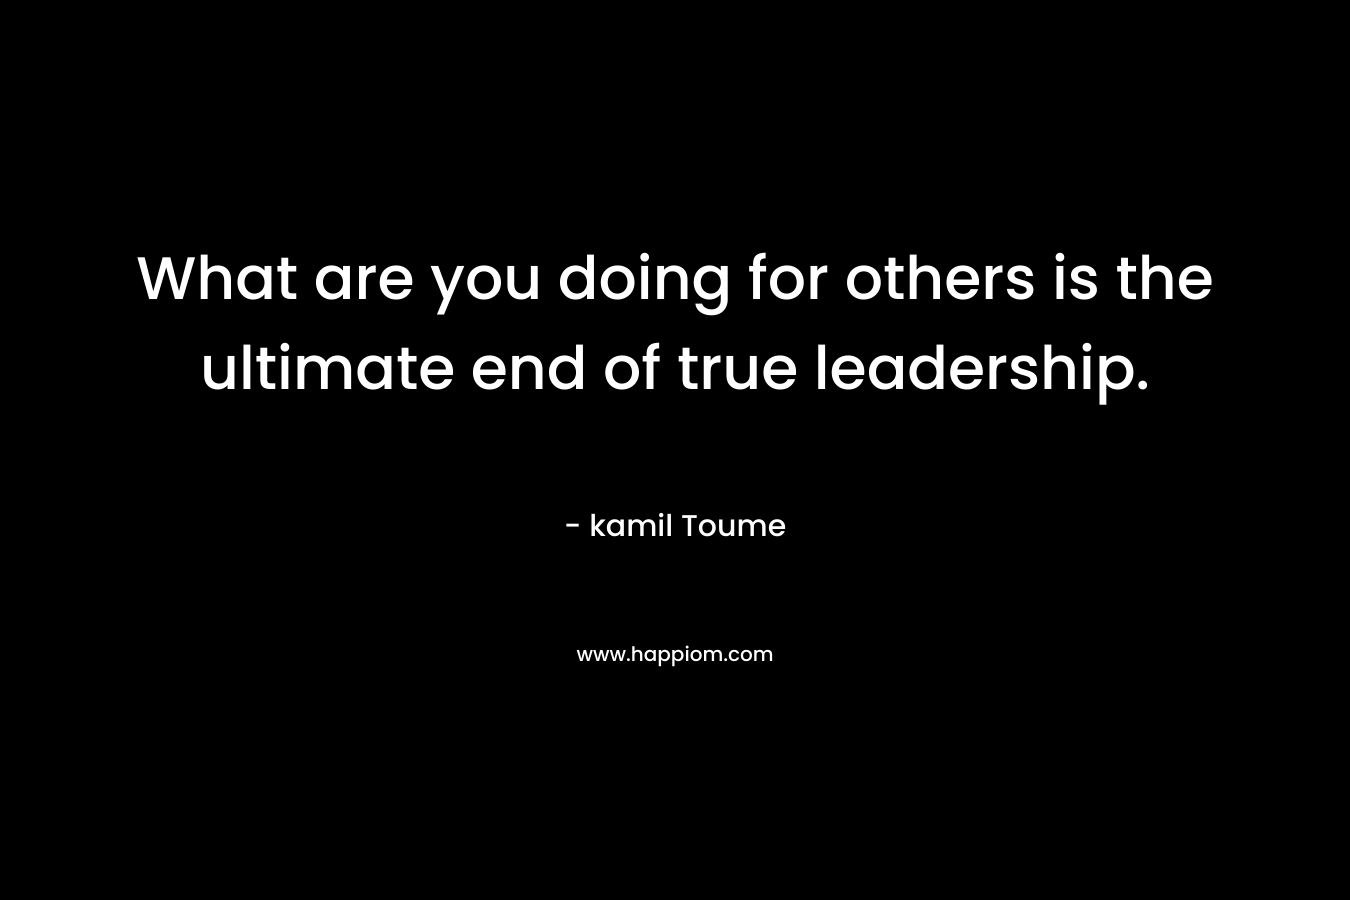 What are you doing for others is the ultimate end of true leadership.